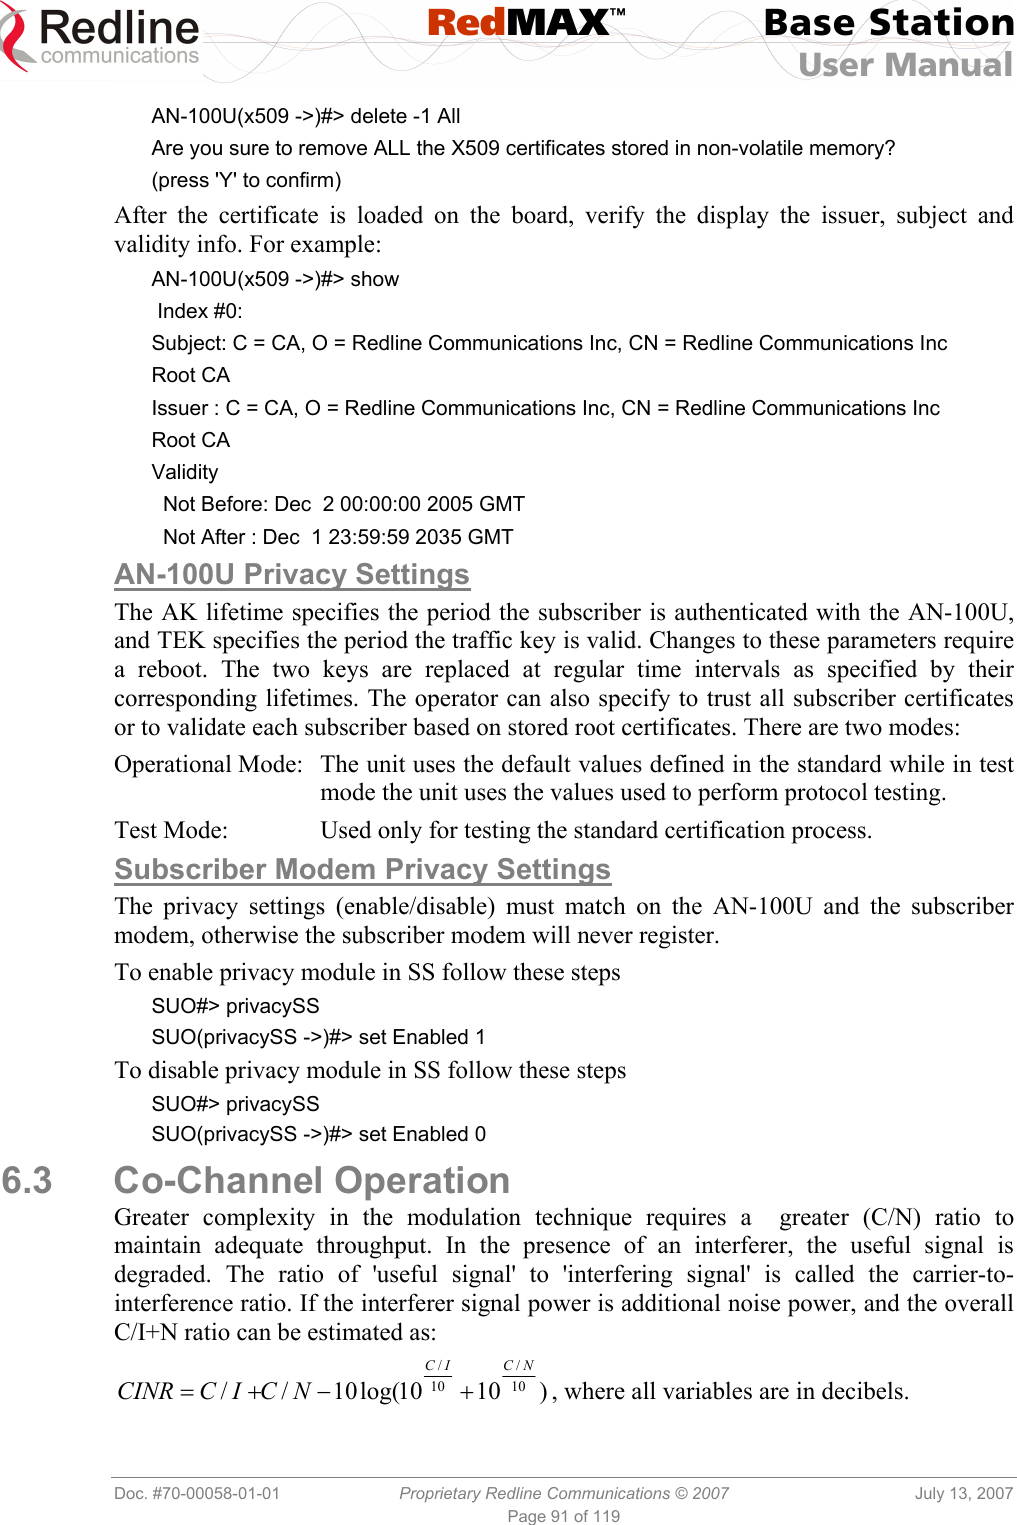  RedMAX™ Base Station User Manual   Doc. #70-00058-01-01  Proprietary Redline Communications © 2007  July 13, 2007 Page 91 of 119 AN-100U(x509 -&gt;)#&gt; delete -1 All Are you sure to remove ALL the X509 certificates stored in non-volatile memory? (press &apos;Y&apos; to confirm) After the certificate is loaded on the board, verify the display the issuer, subject and validity info. For example: AN-100U(x509 -&gt;)#&gt; show  Index #0: Subject: C = CA, O = Redline Communications Inc, CN = Redline Communications Inc Root CA Issuer : C = CA, O = Redline Communications Inc, CN = Redline Communications Inc Root CA Validity   Not Before: Dec  2 00:00:00 2005 GMT   Not After : Dec  1 23:59:59 2035 GMT AN-100U Privacy Settings The AK lifetime specifies the period the subscriber is authenticated with the AN-100U, and TEK specifies the period the traffic key is valid. Changes to these parameters require a reboot. The two keys are replaced at regular time intervals as specified by their corresponding lifetimes. The operator can also specify to trust all subscriber certificates or to validate each subscriber based on stored root certificates. There are two modes: Operational Mode:  The unit uses the default values defined in the standard while in test mode the unit uses the values used to perform protocol testing. Test Mode:  Used only for testing the standard certification process. Subscriber Modem Privacy Settings The privacy settings (enable/disable) must match on the AN-100U and the subscriber modem, otherwise the subscriber modem will never register. To enable privacy module in SS follow these steps SUO#&gt; privacySS SUO(privacySS -&gt;)#&gt; set Enabled 1 To disable privacy module in SS follow these steps SUO#&gt; privacySS SUO(privacySS -&gt;)#&gt; set Enabled 0 6.3 Co-Channel Operation Greater complexity in the modulation technique requires a  greater (C/N) ratio to maintain adequate throughput. In the presence of an interferer, the useful signal is degraded. The ratio of &apos;useful signal&apos; to &apos;interfering signal&apos; is called the carrier-to-interference ratio. If the interferer signal power is additional noise power, and the overall C/I+N ratio can be estimated as: )1010log(10// 10/10/NCICNCICCINR +−+= , where all variables are in decibels. 